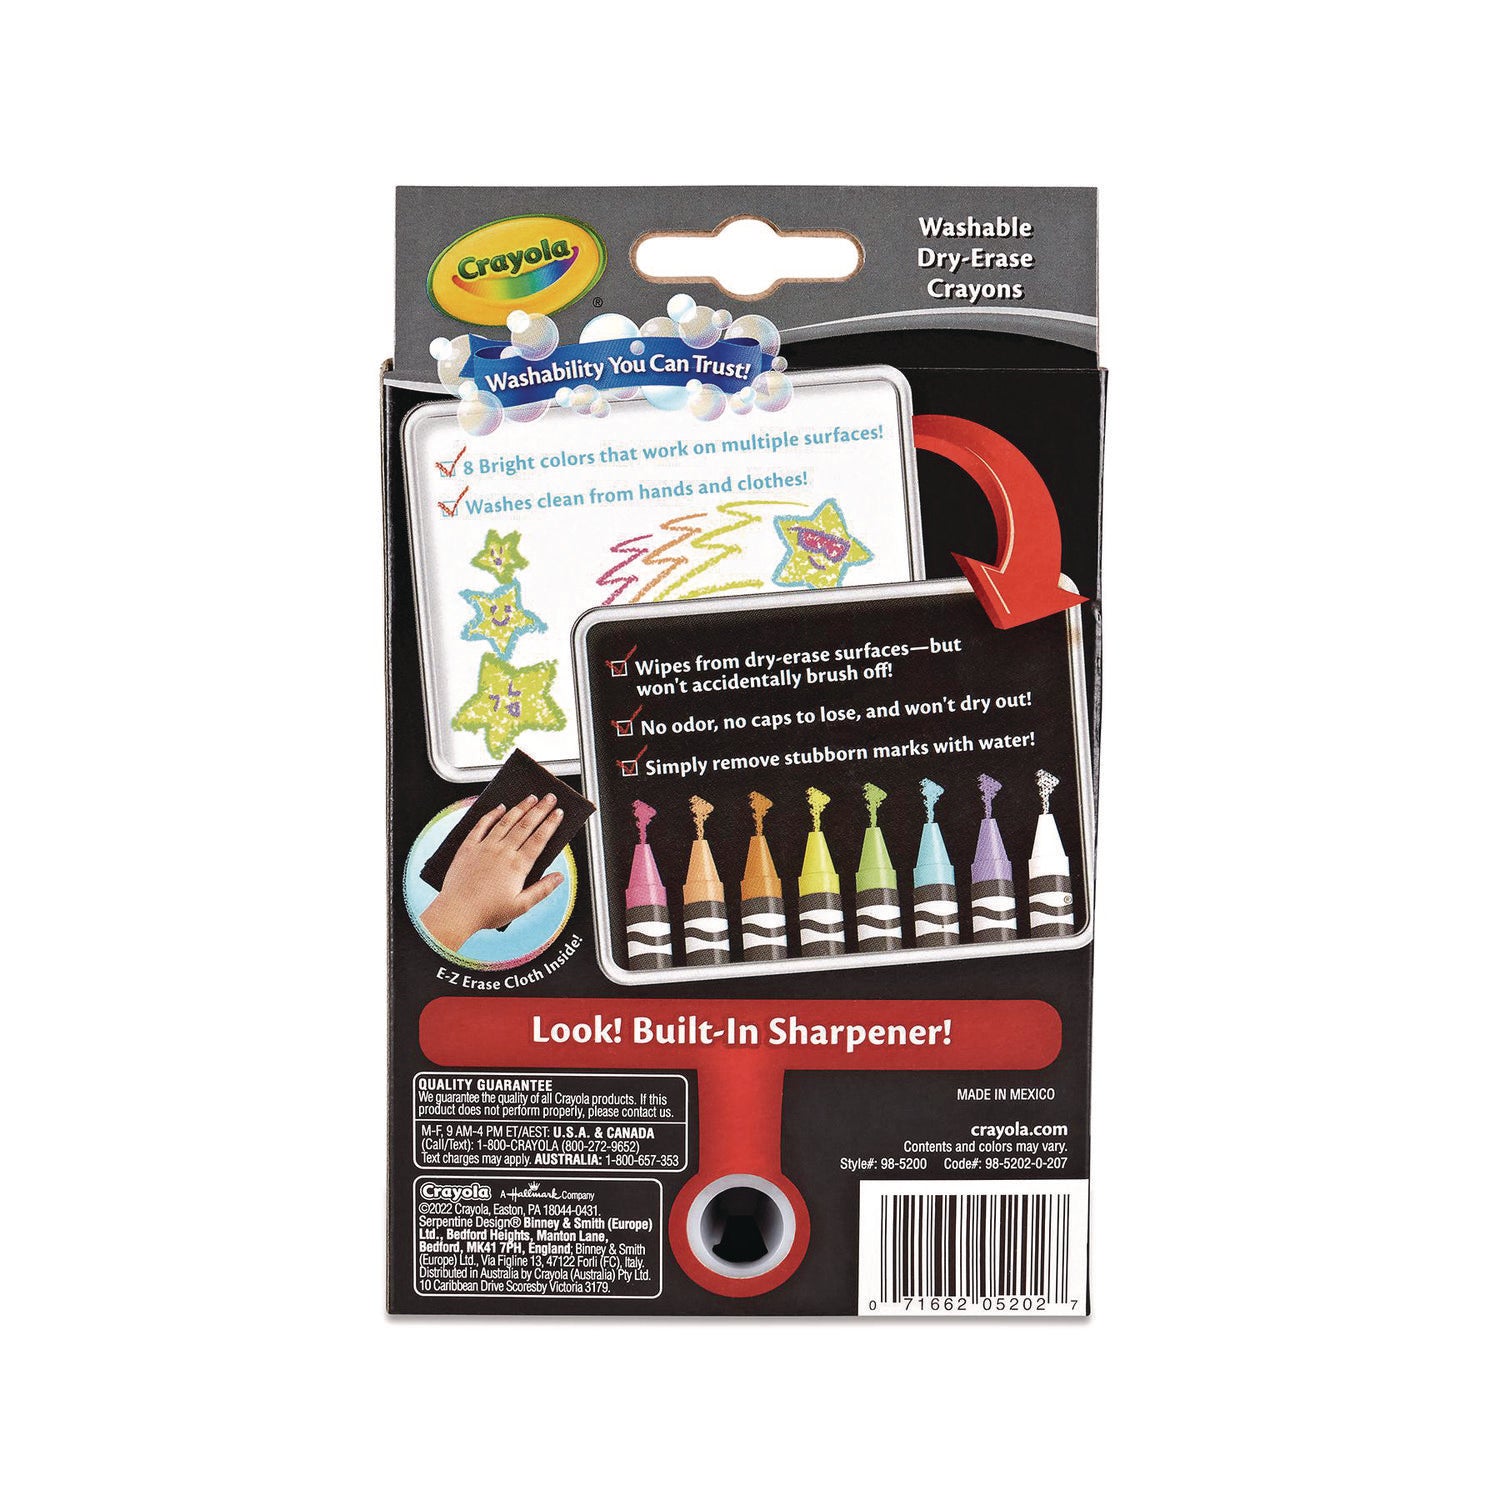 Washable Dry Erase Crayons w/E-Z Erase Cloth, Assorted Bright Colors, 8/Box - 4